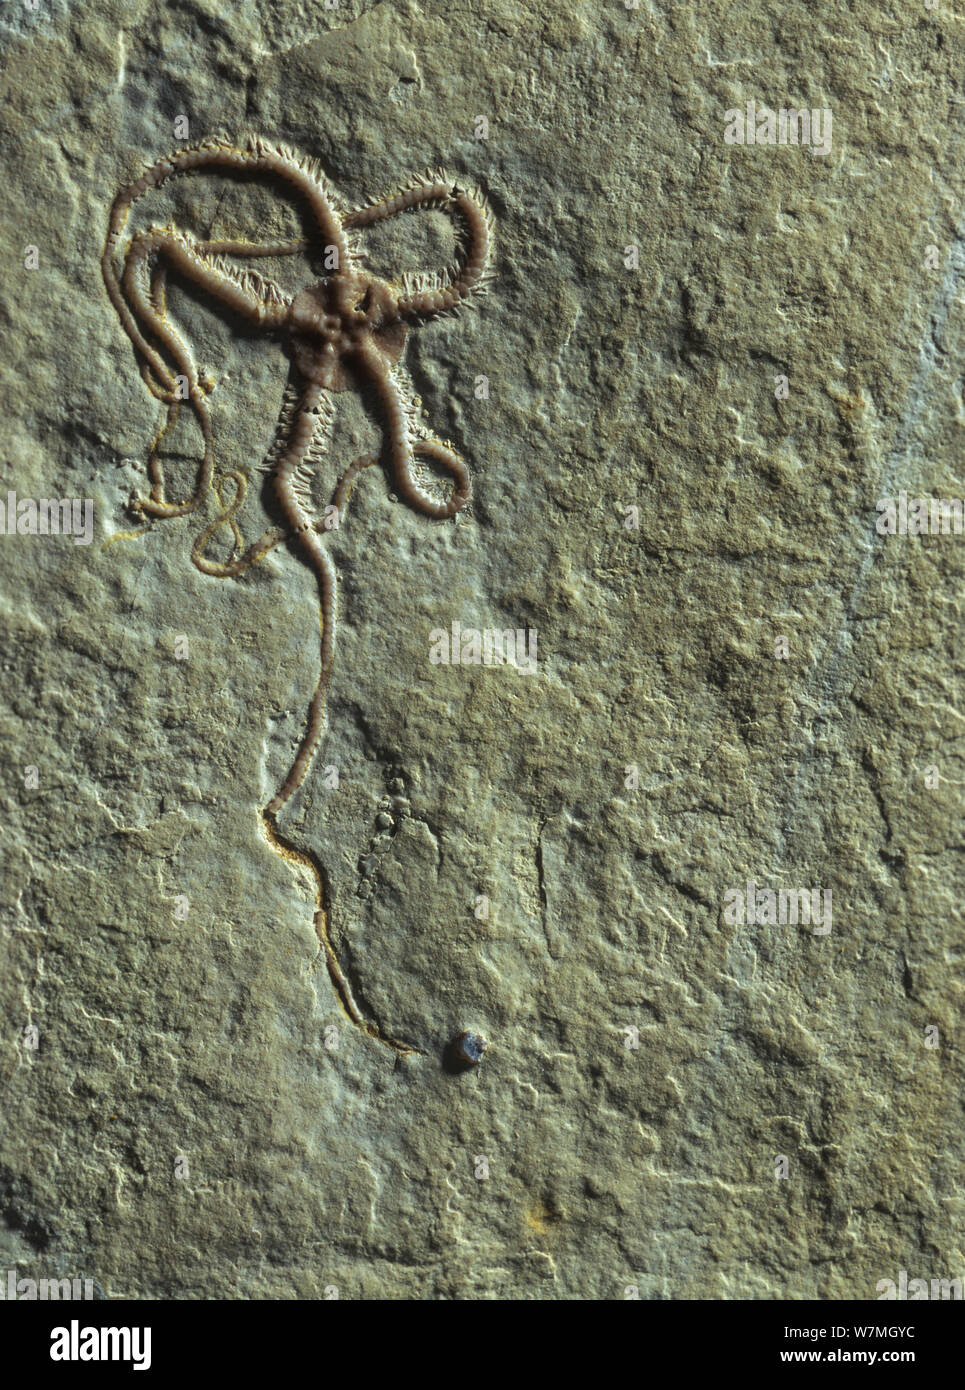 Fossil of Brittlestar (Ophiopetra sp) from the Jurassic period, Germany Stock Photo